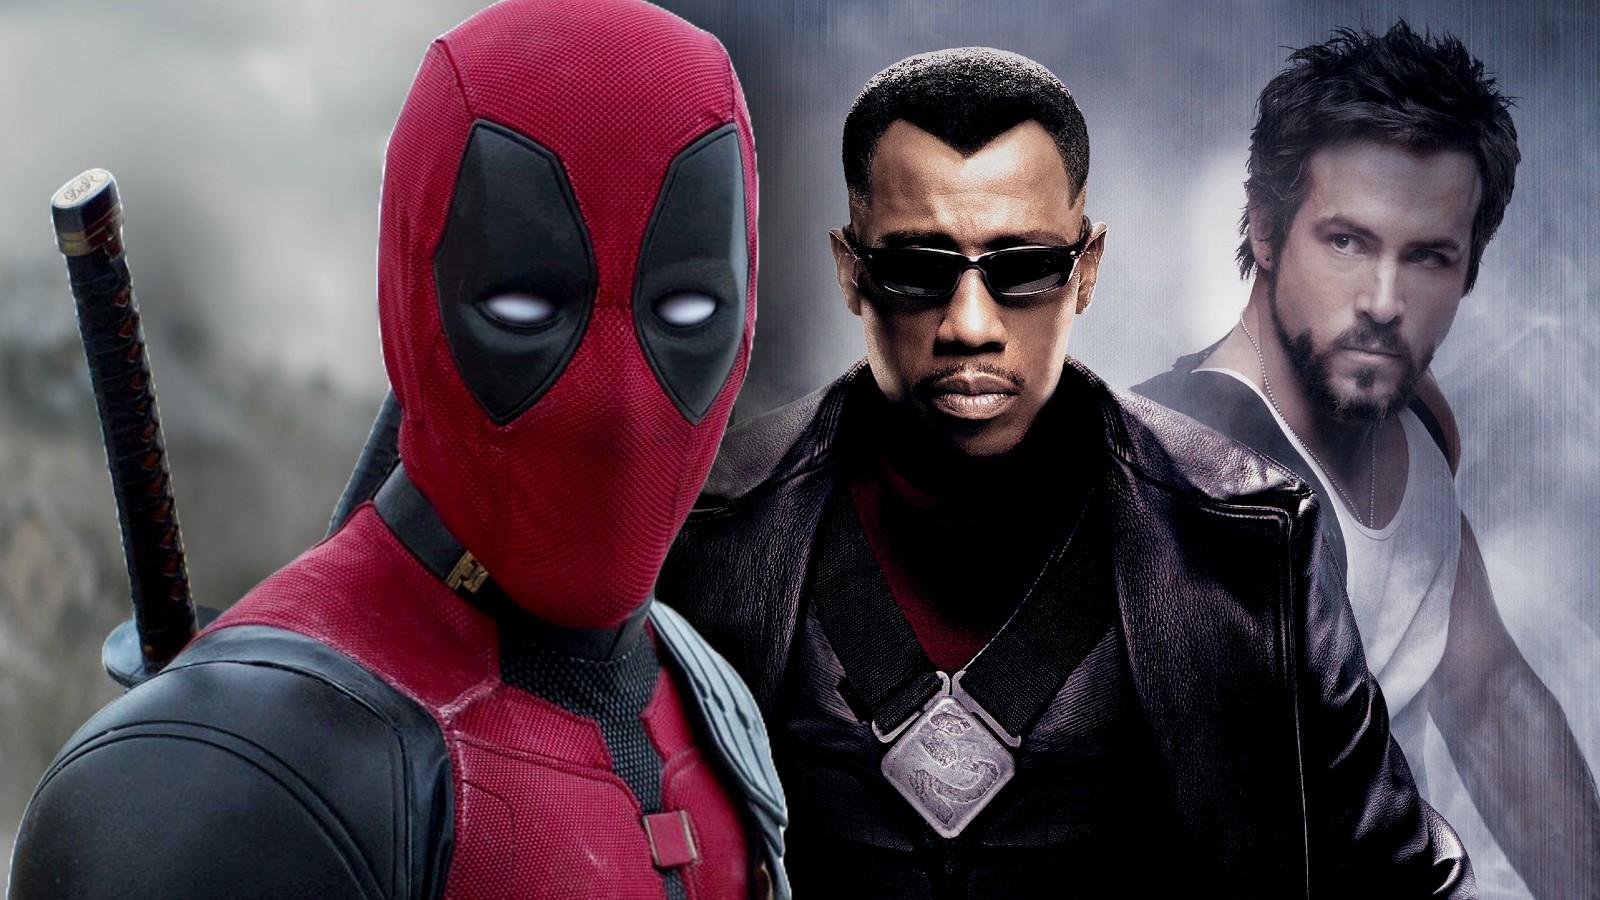 A still from Deadpool and Wolverine next to Wesley Snipes and Ryan Reynolds in Blade Trinity